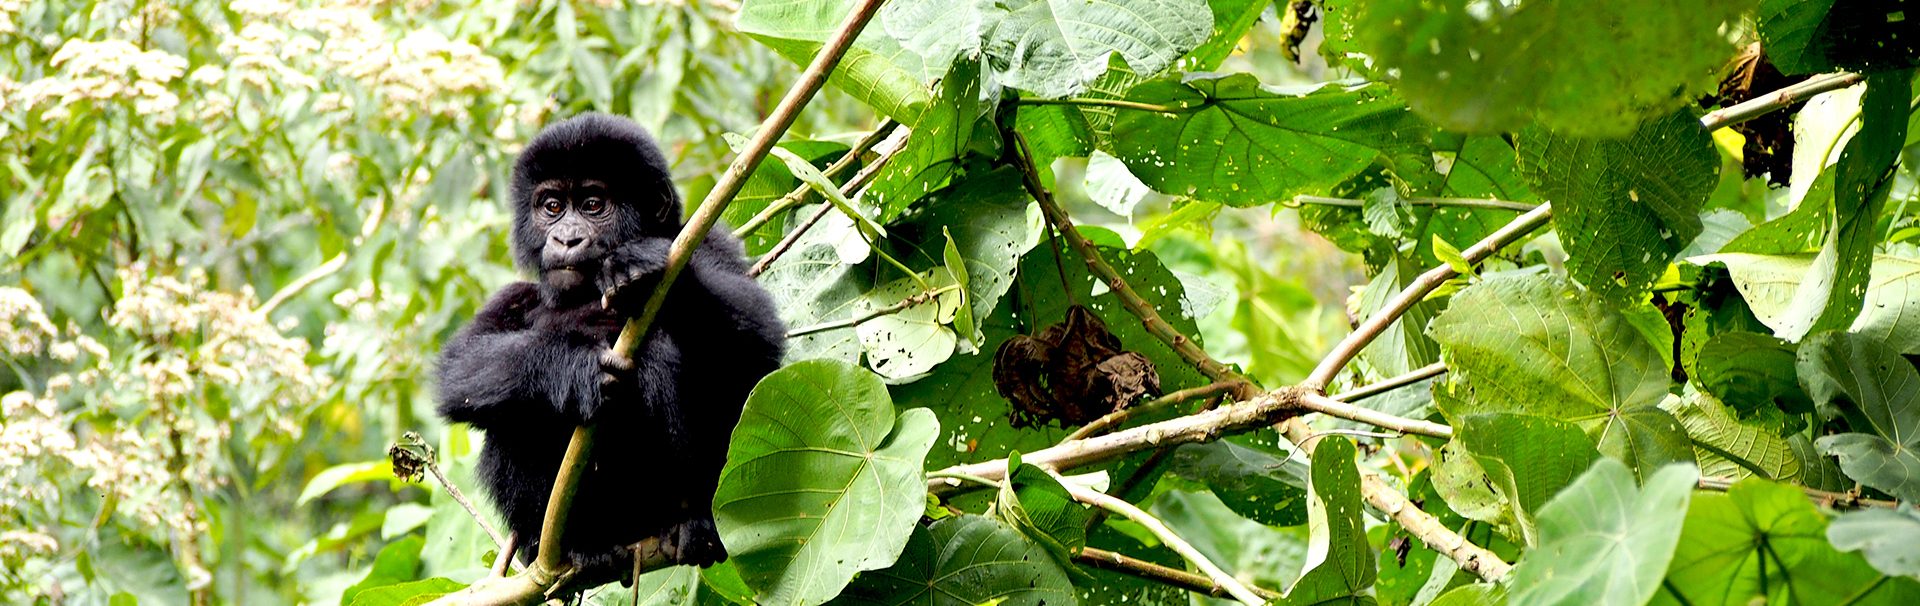 Baby gorilla in Bwindi Impenetrable Forest